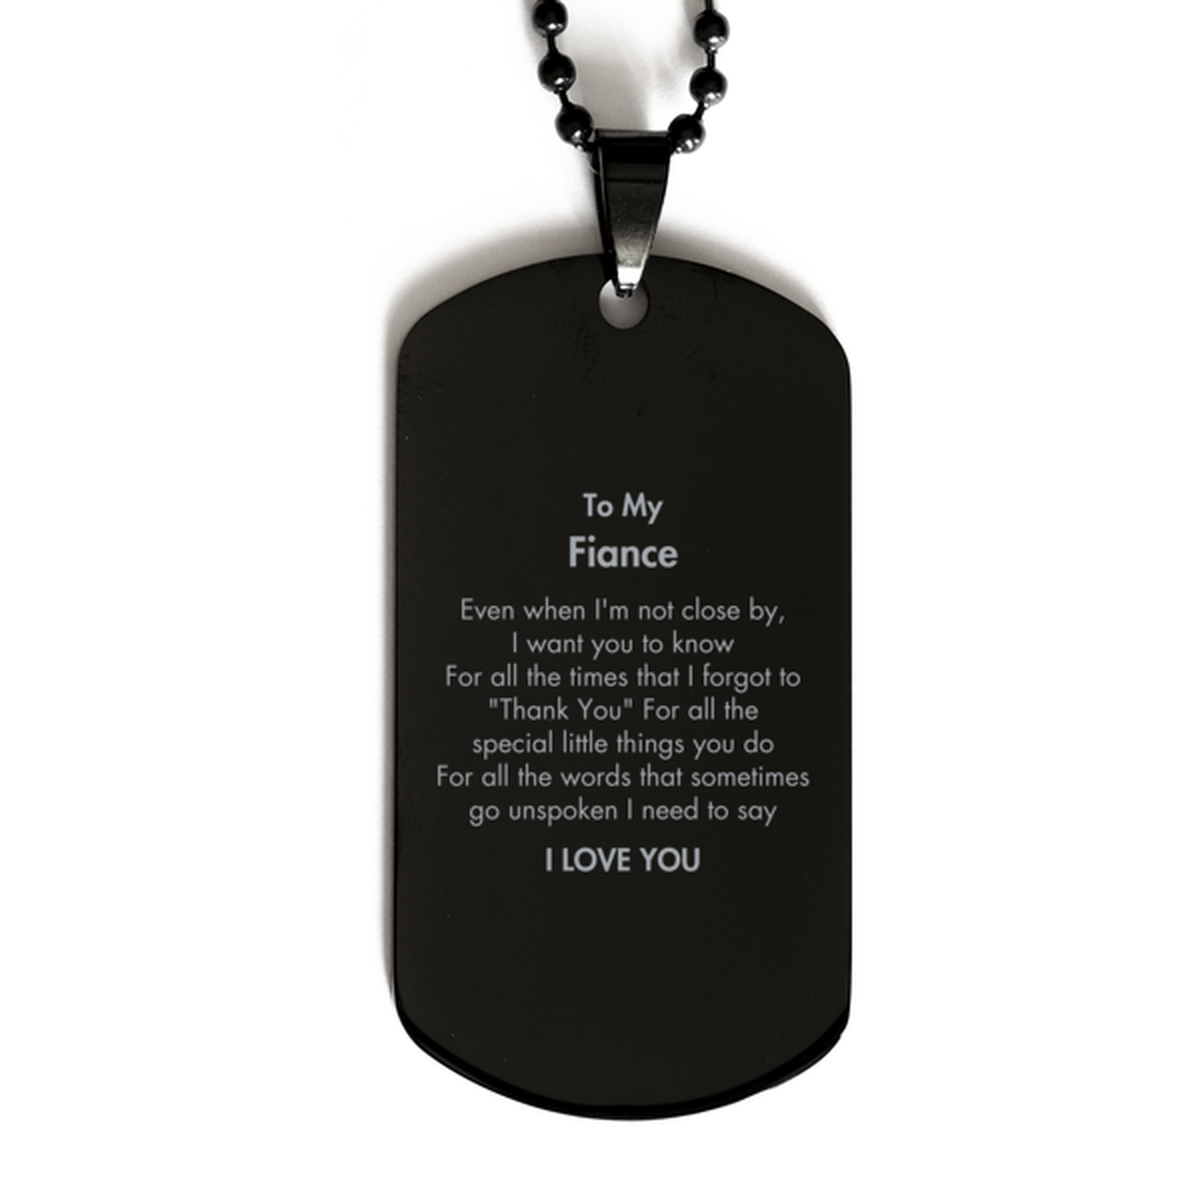 Thank You Gifts for Fiance, Keepsake Black Dog Tag Gifts for Fiance Birthday Mother's day Father's Day Fiance For all the words That sometimes go unspoken I need to say I LOVE YOU